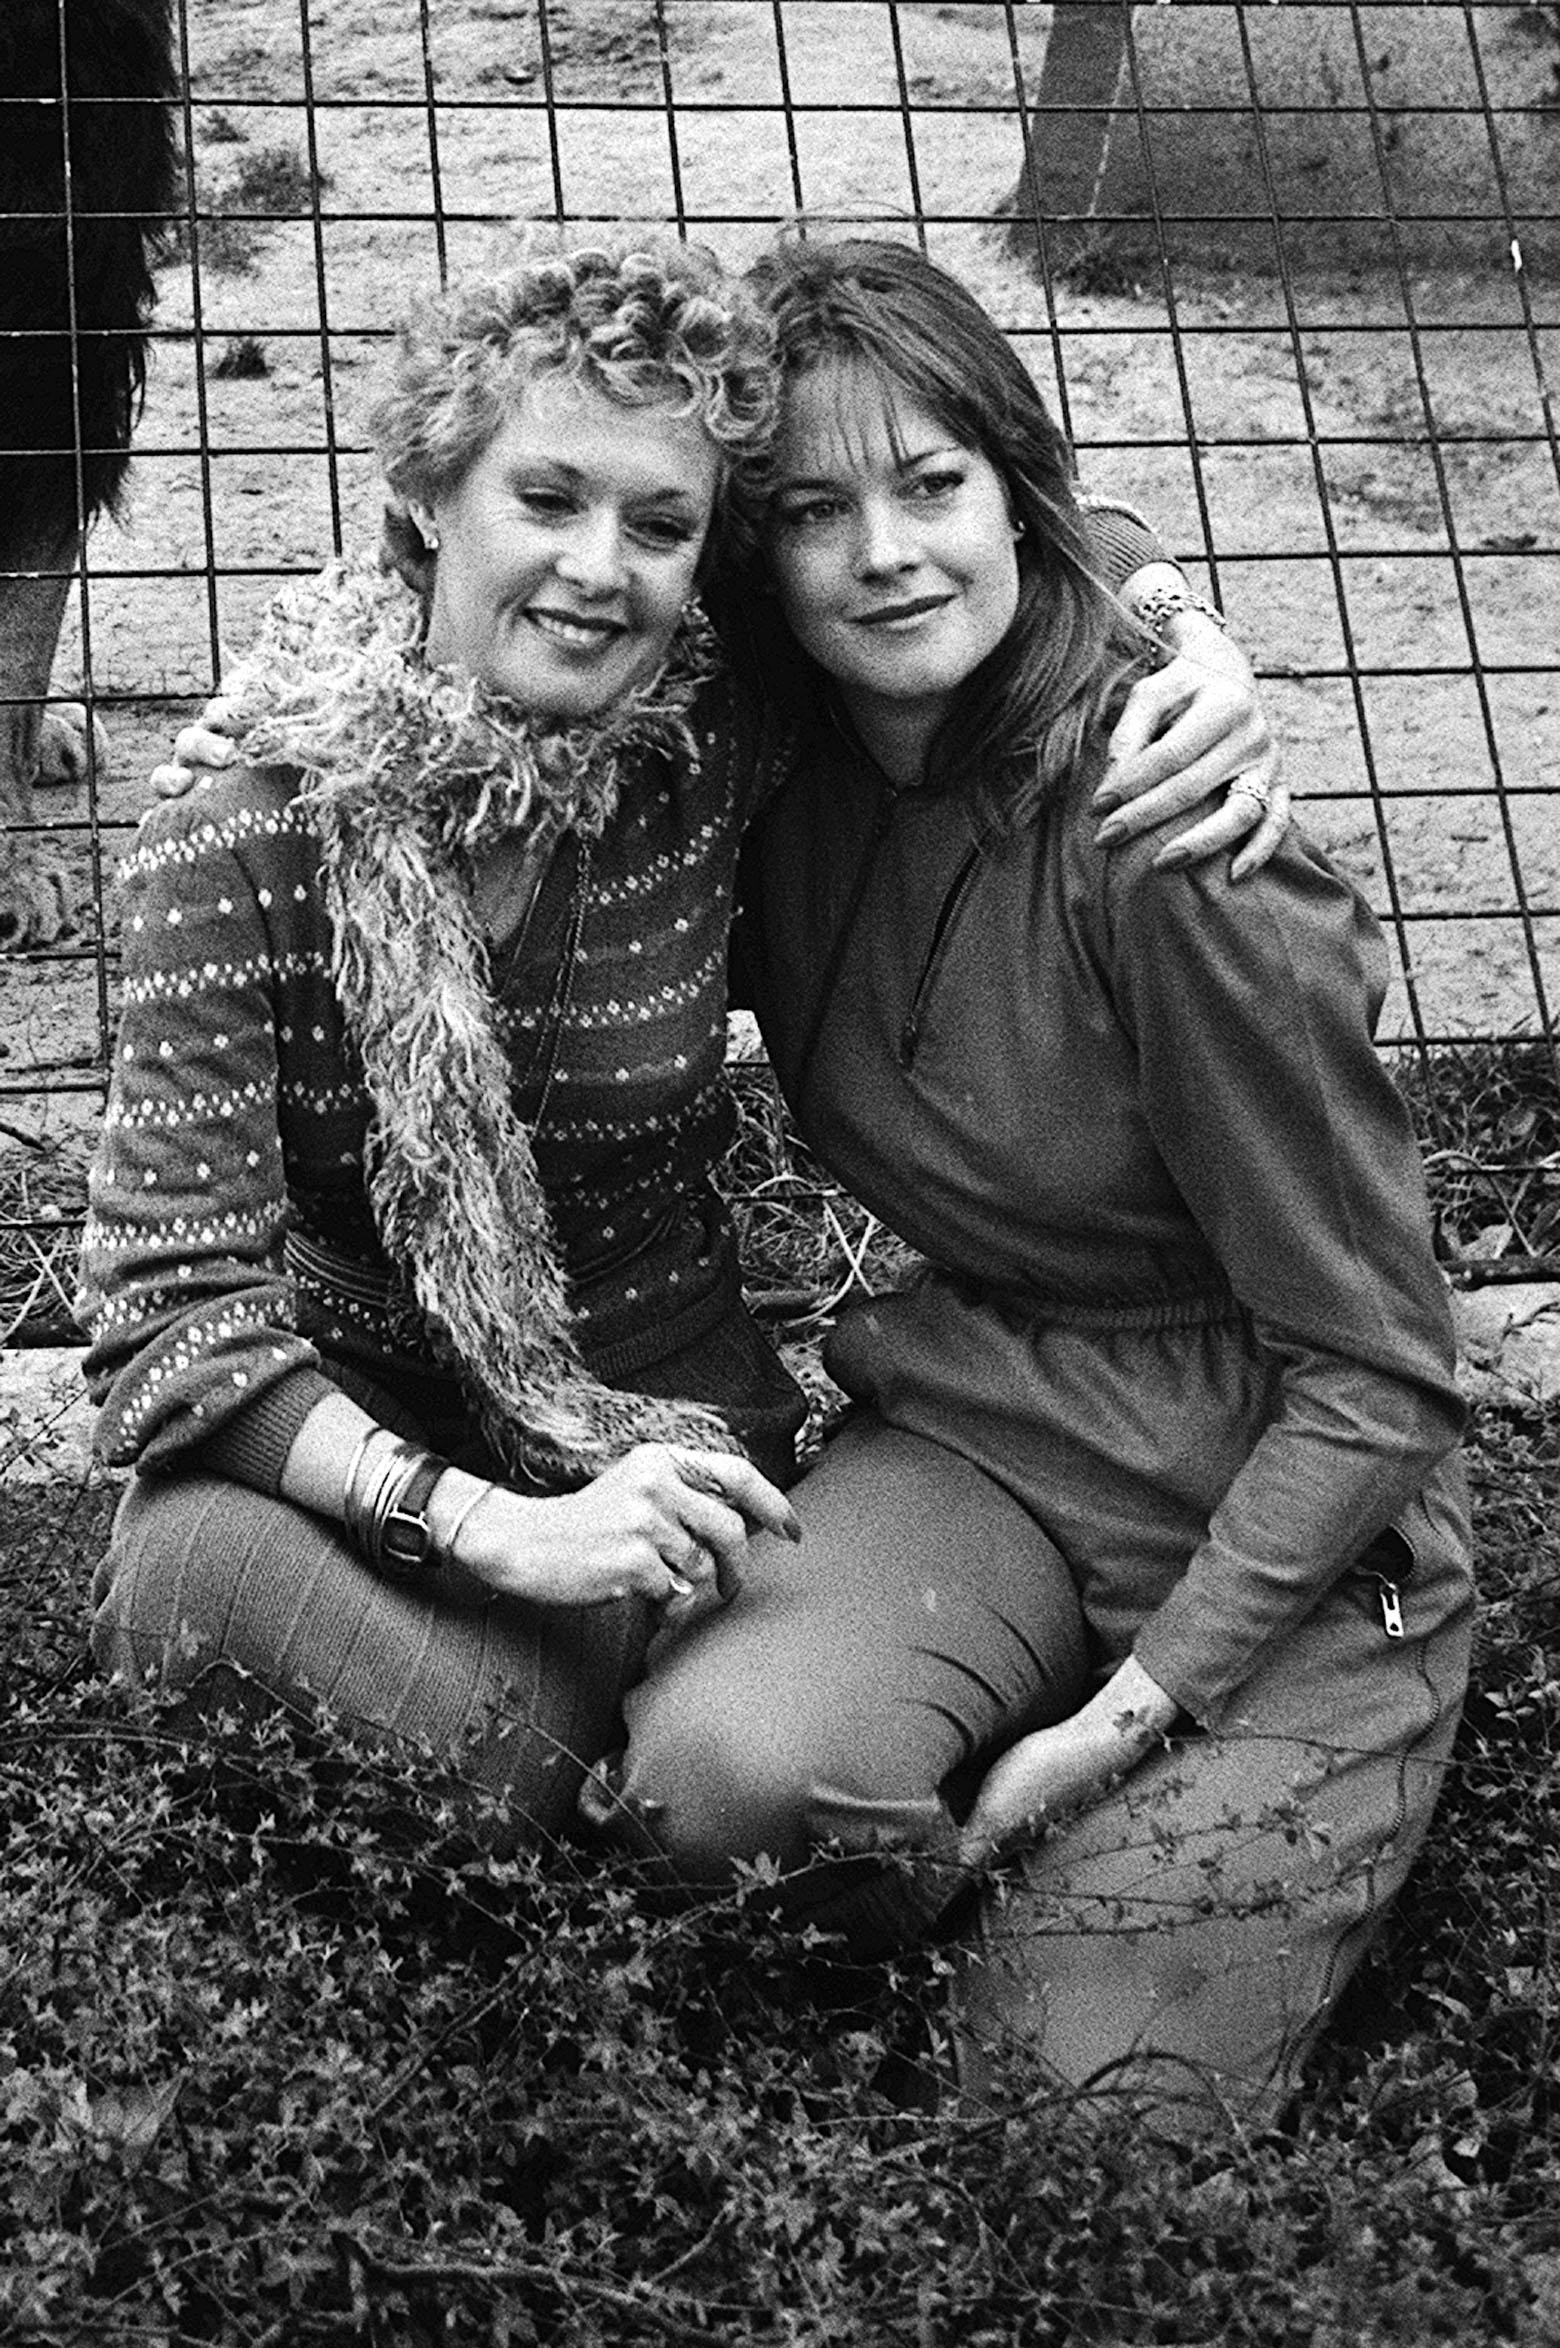 Tippi Hedron and Melanie Griffith at the London Zoo on March 29, 1982, in England. | Source: Getty Images